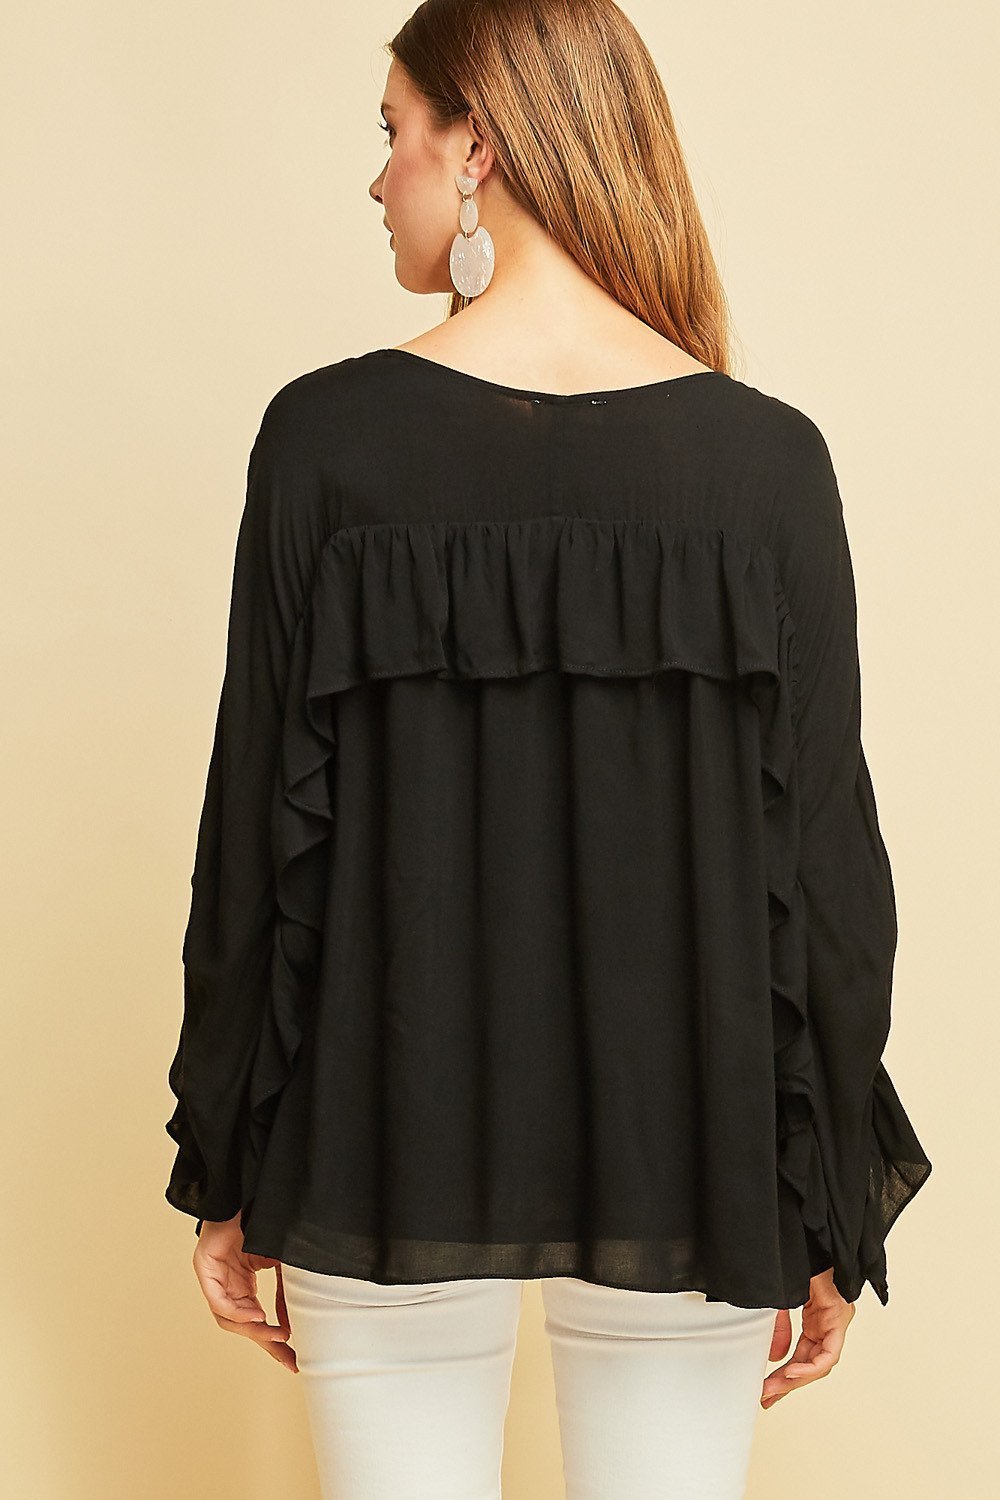 Long Sleeve Button Down Shirt with Ruffles by Entro